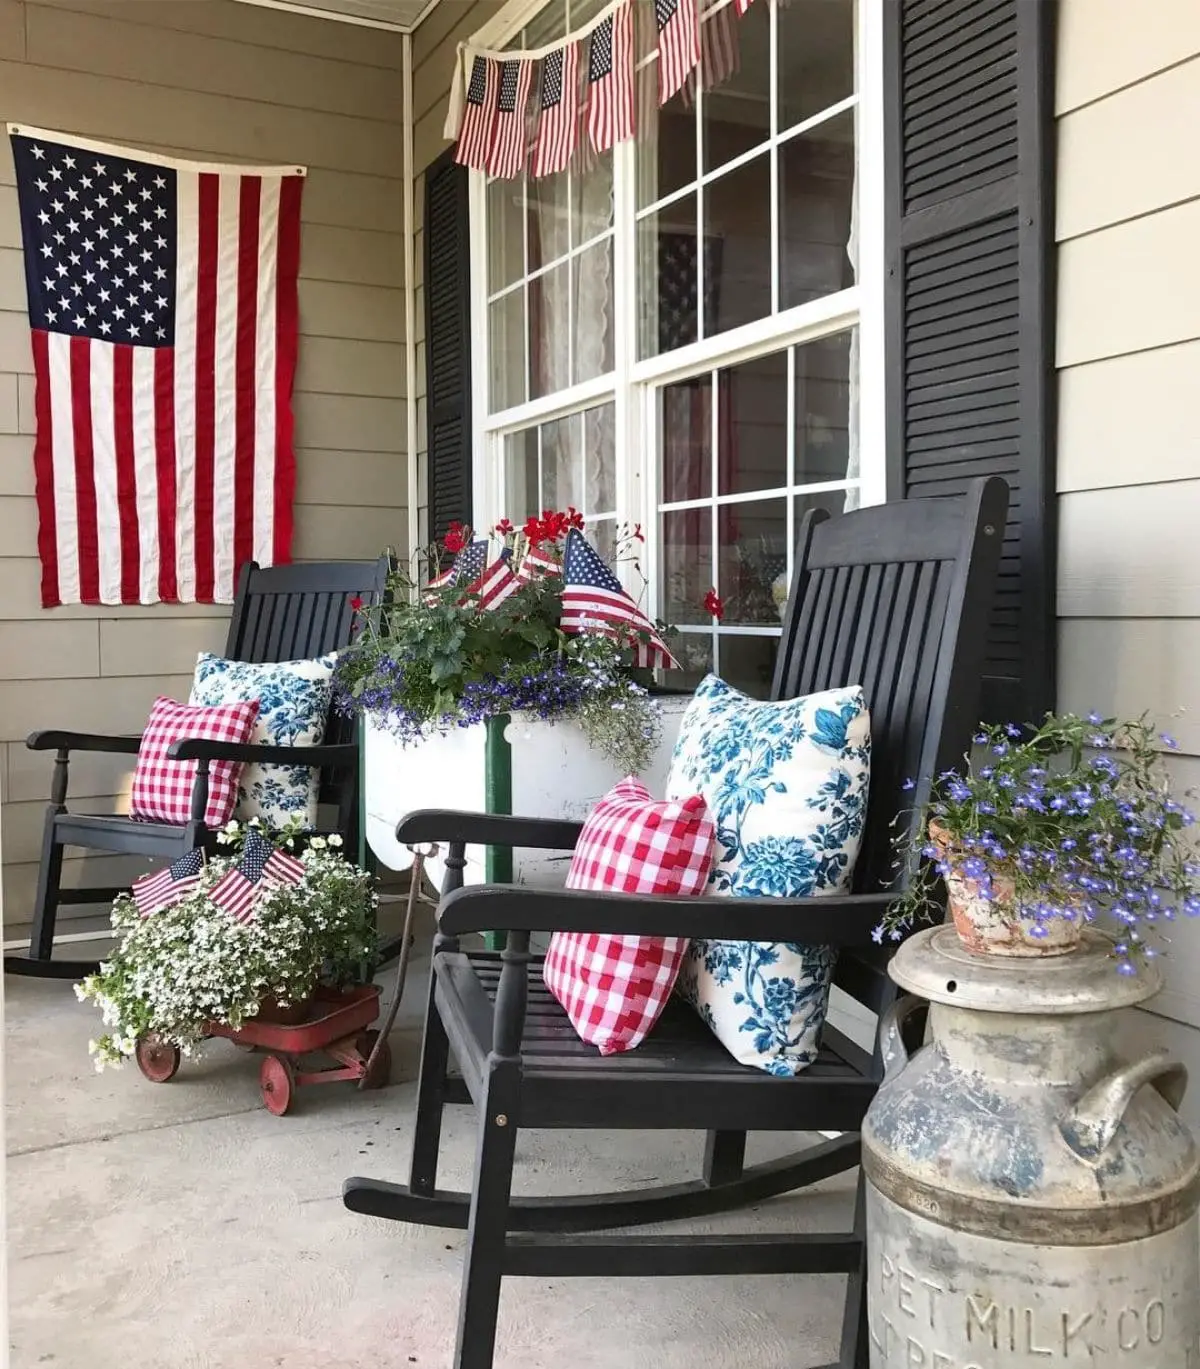 porch with black rocking chairs, festive pillows and flags